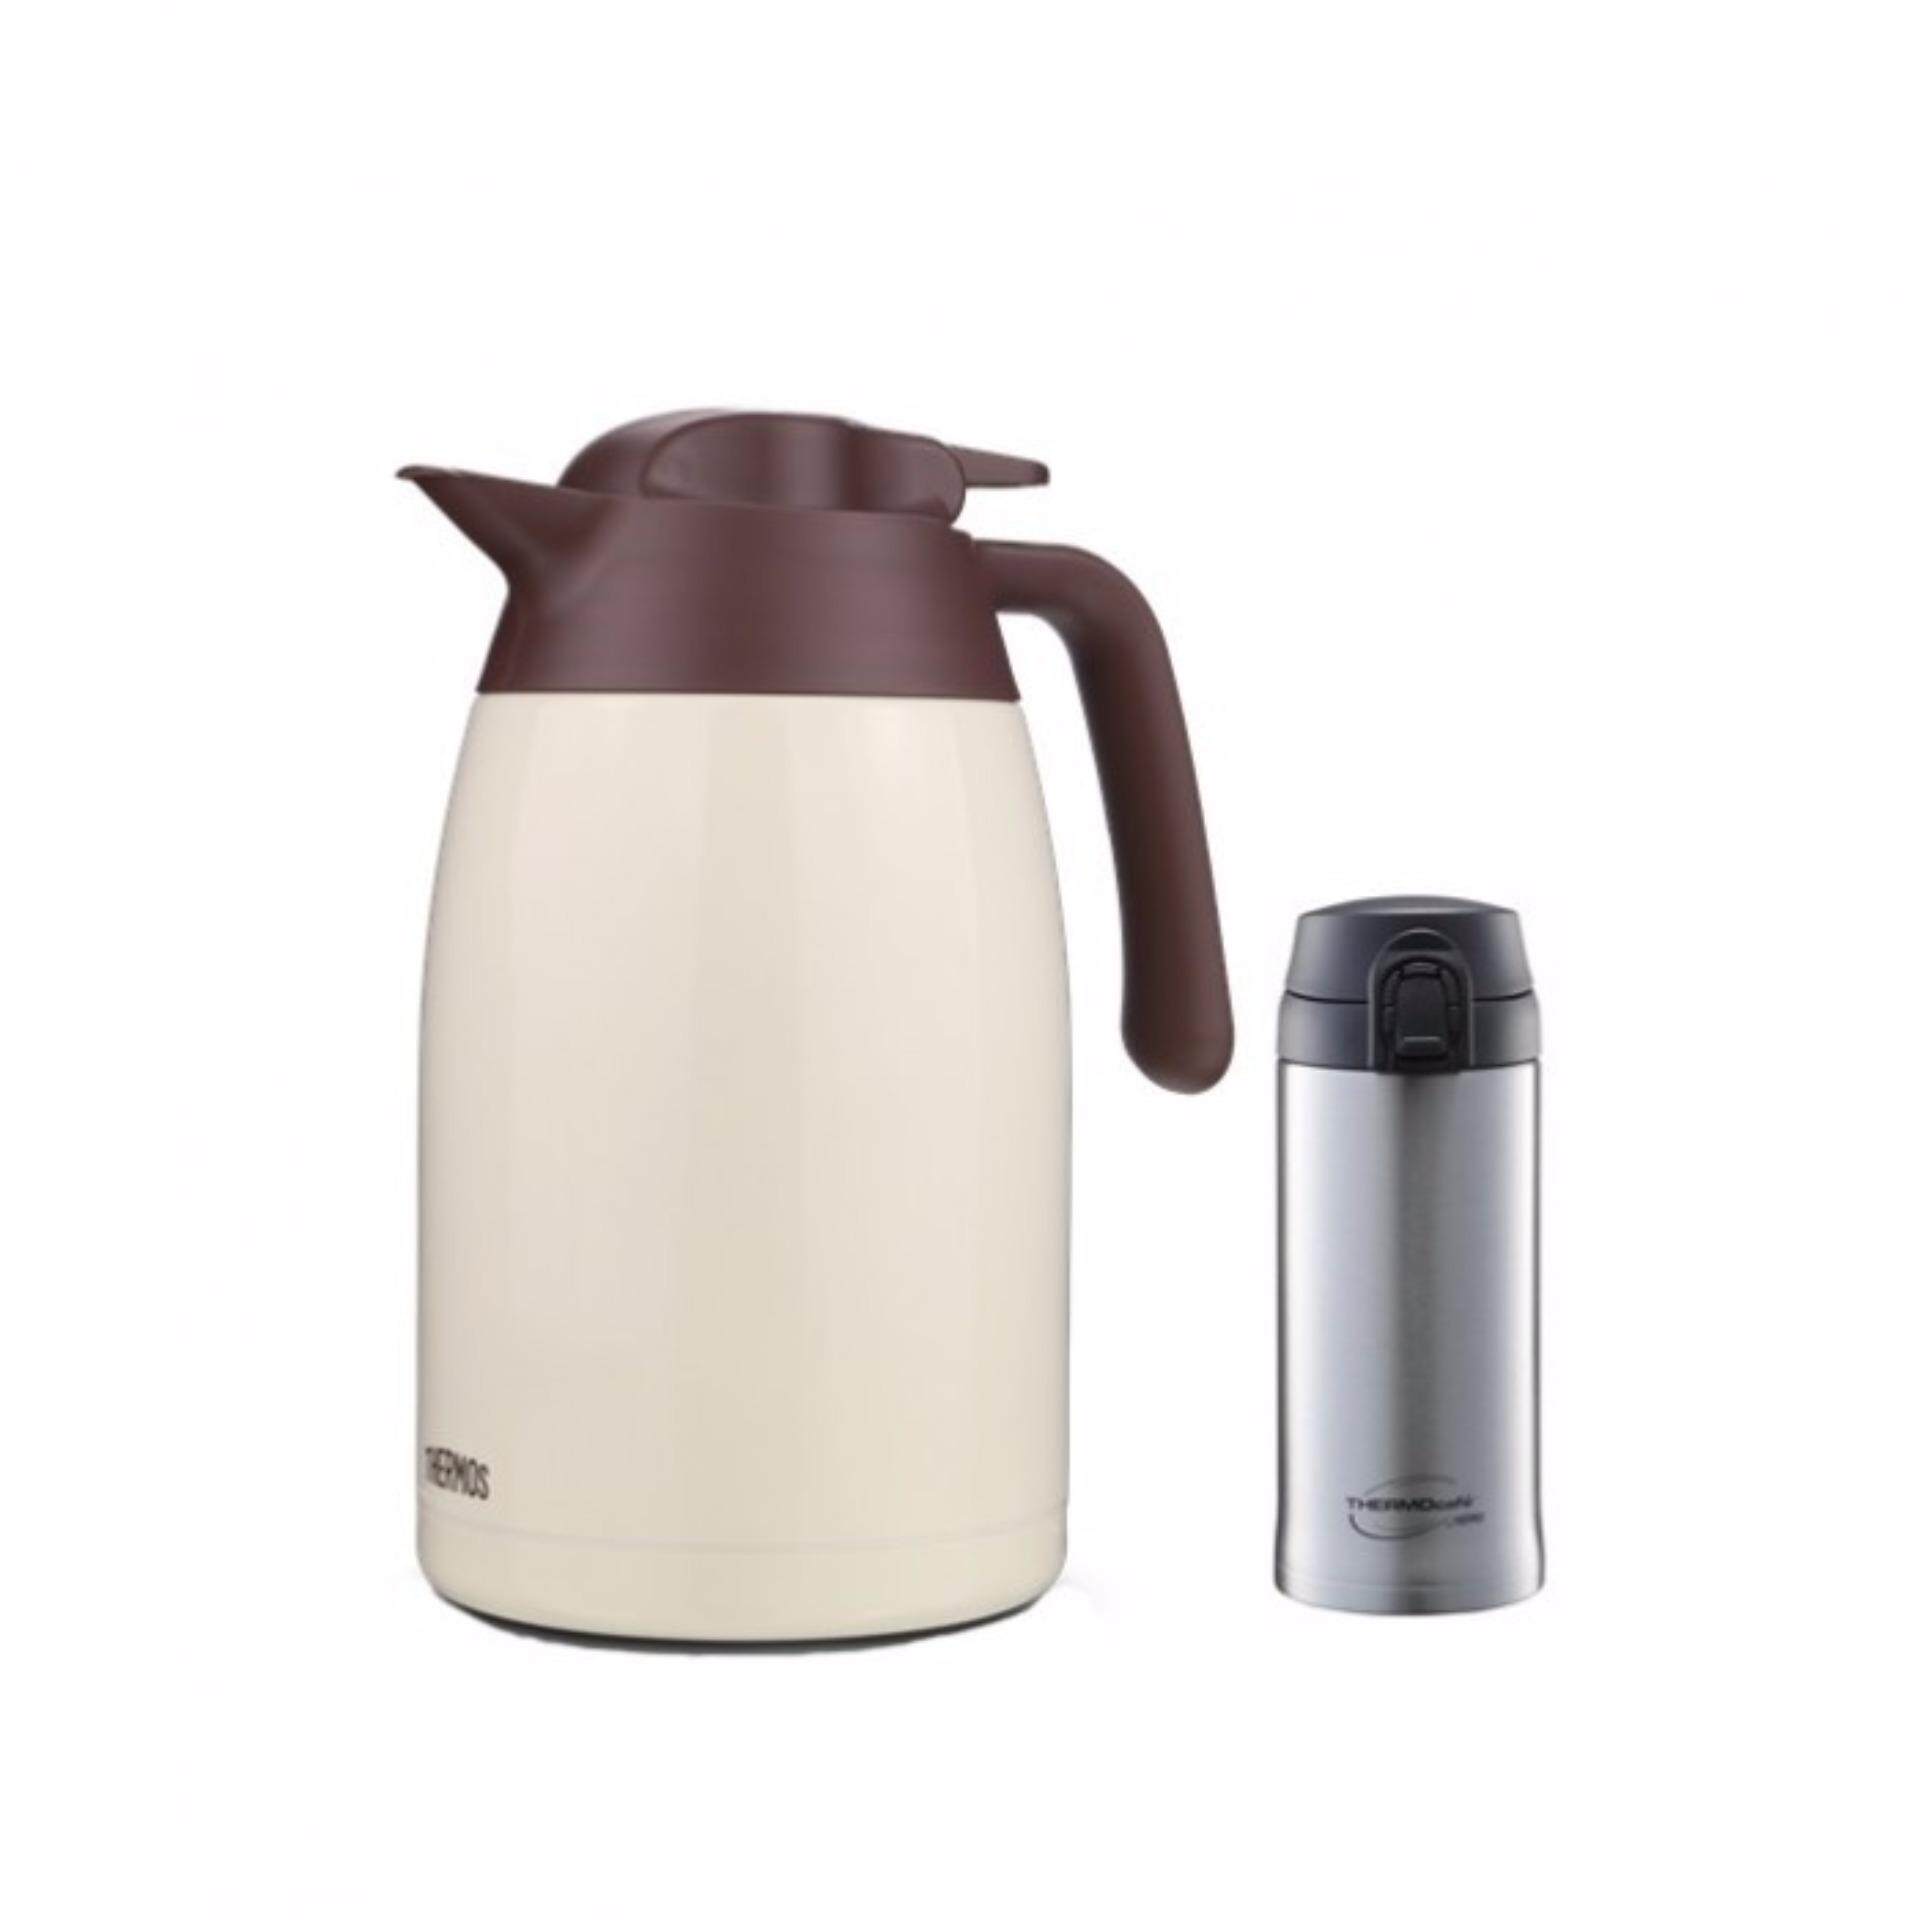 [FREE SHIPPING] Thermos - Stainless Steel Lifestyle Carafe 1.5L (Cookie Cream) *FOC Thermocafe Flask 350ml*